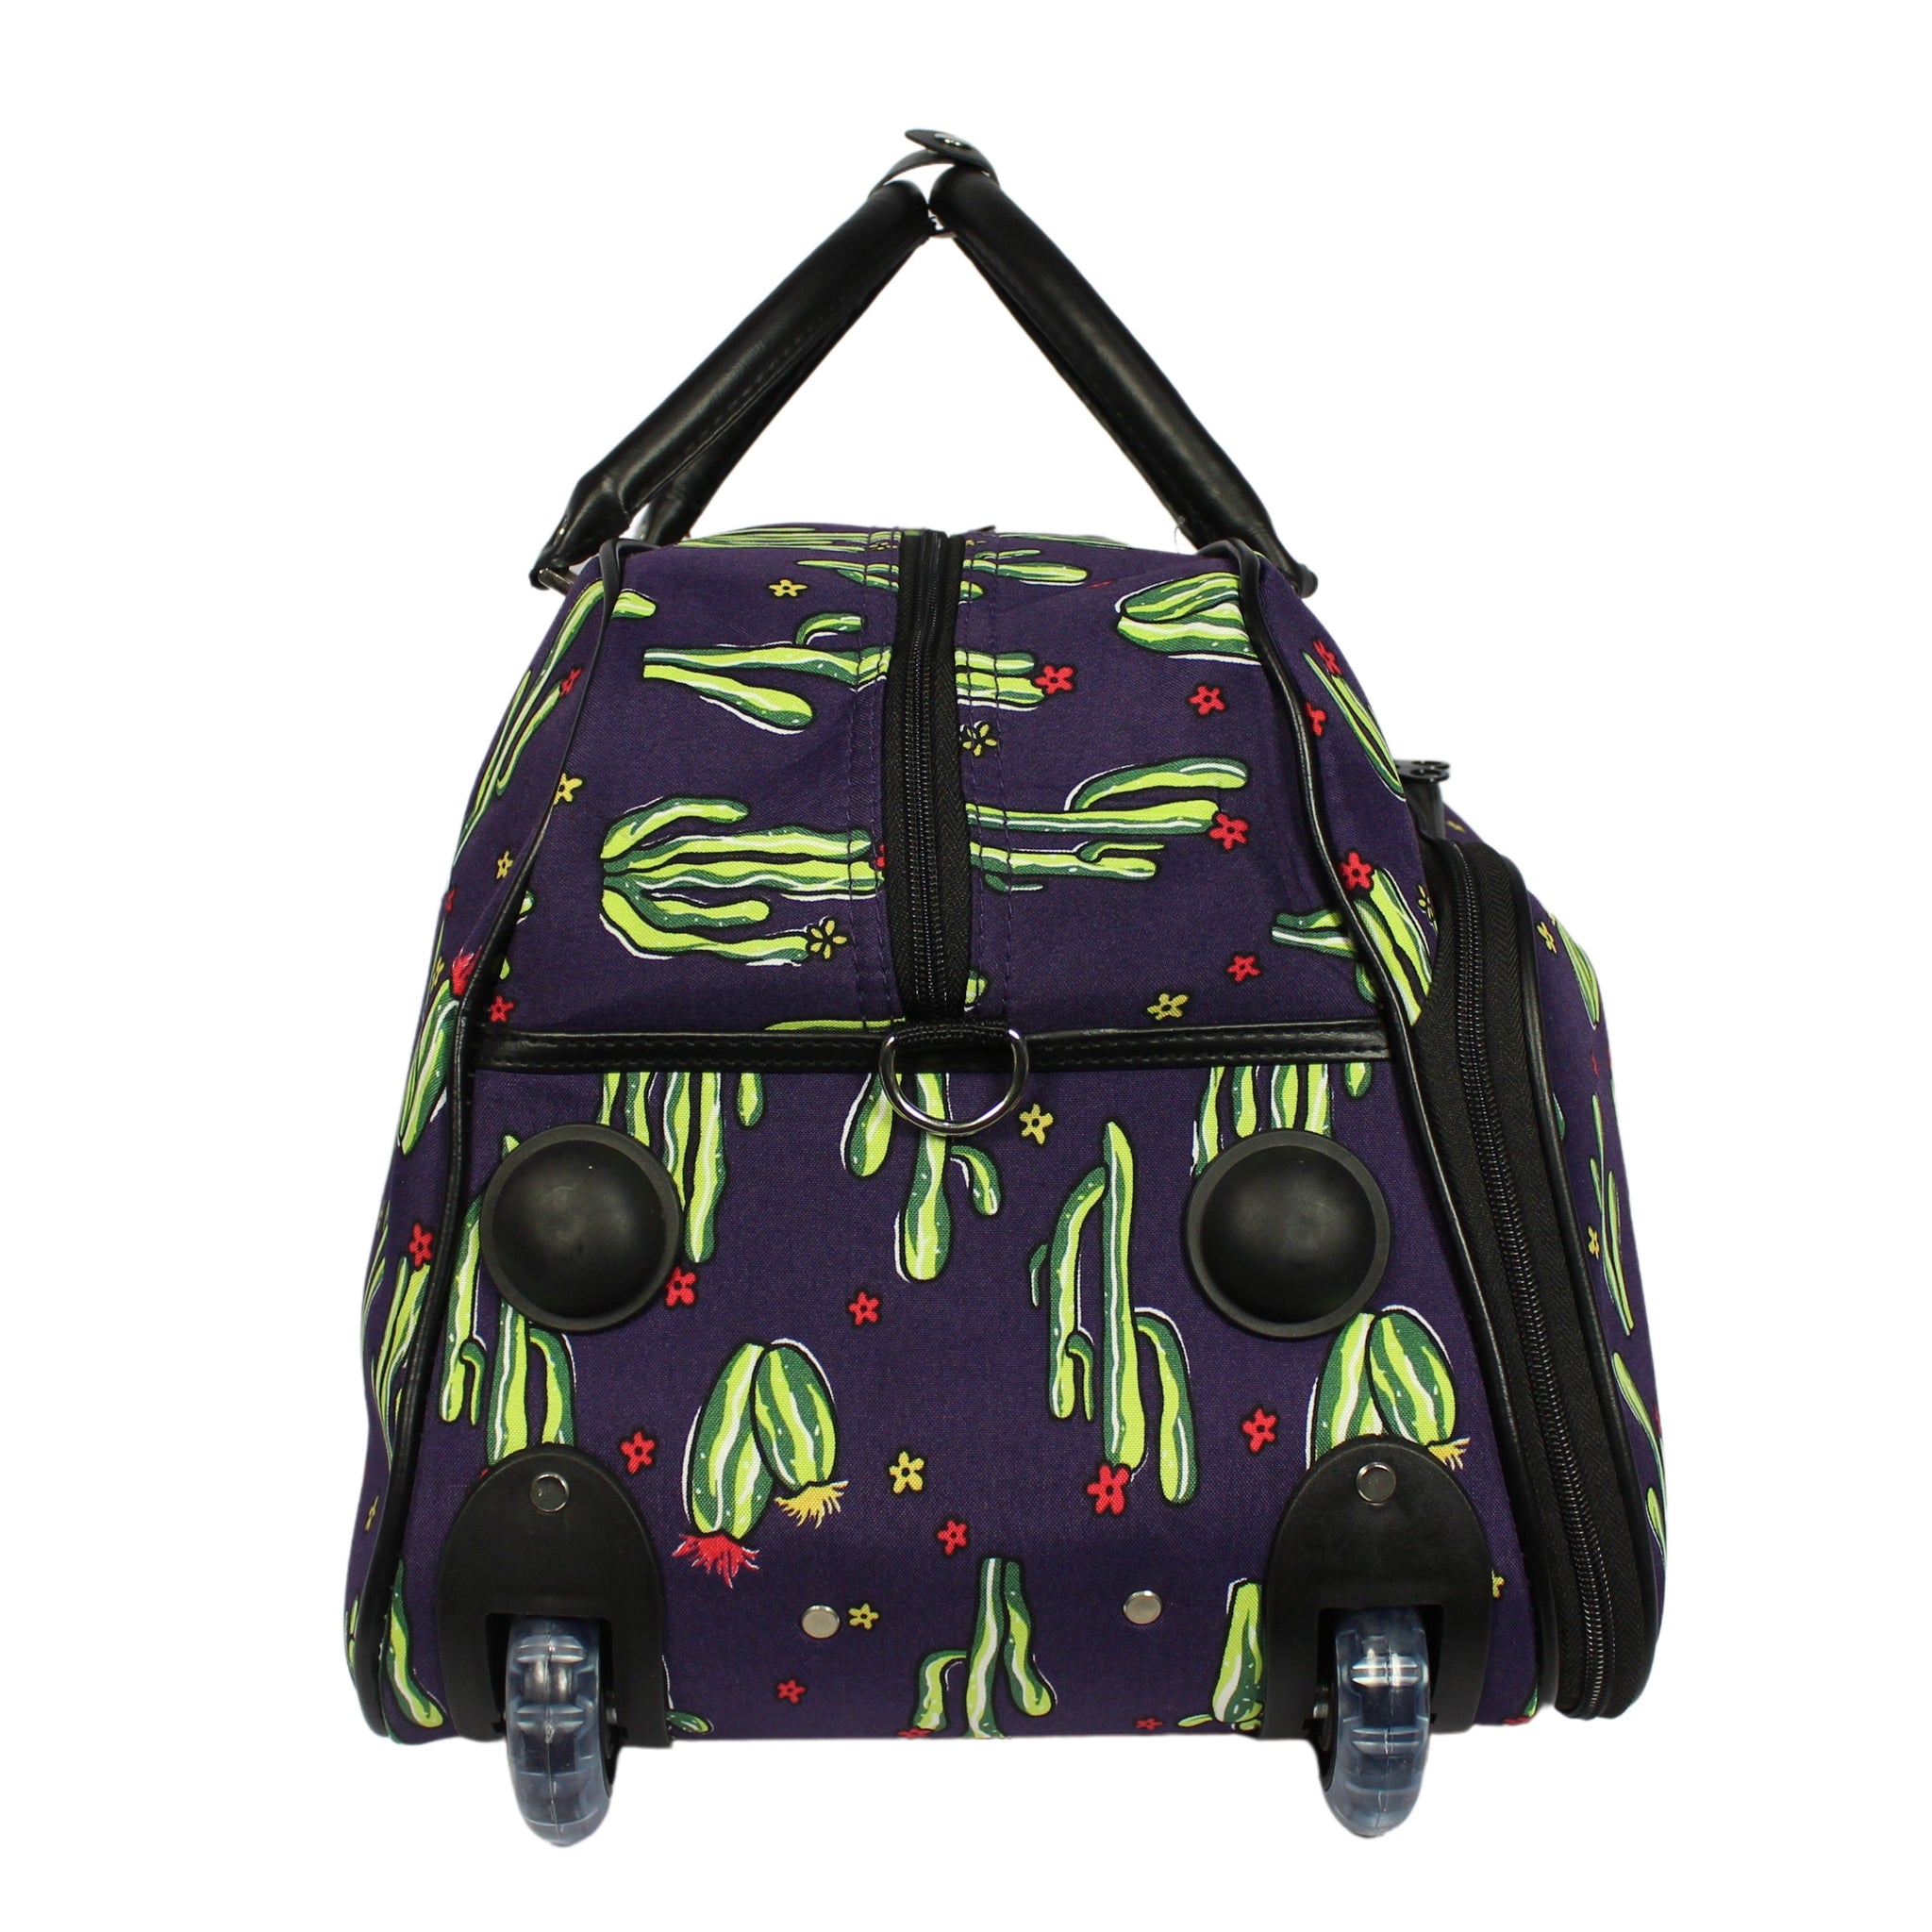 CalBags 21" Rolling Carry-On Duffel Bag - Cactus